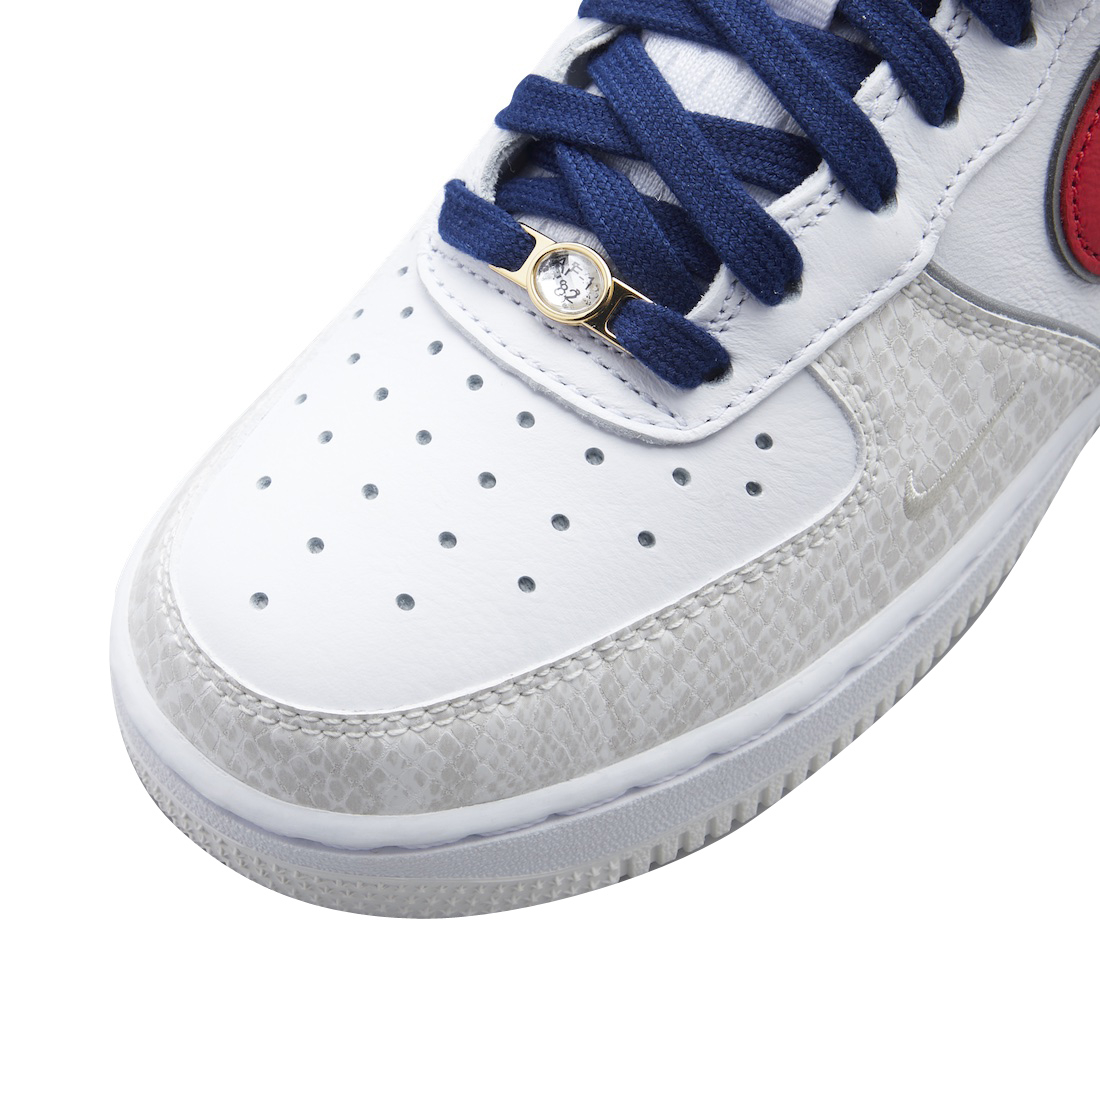 Nike WMNS Air Force 1 07 LX Just Do It DV1493-161